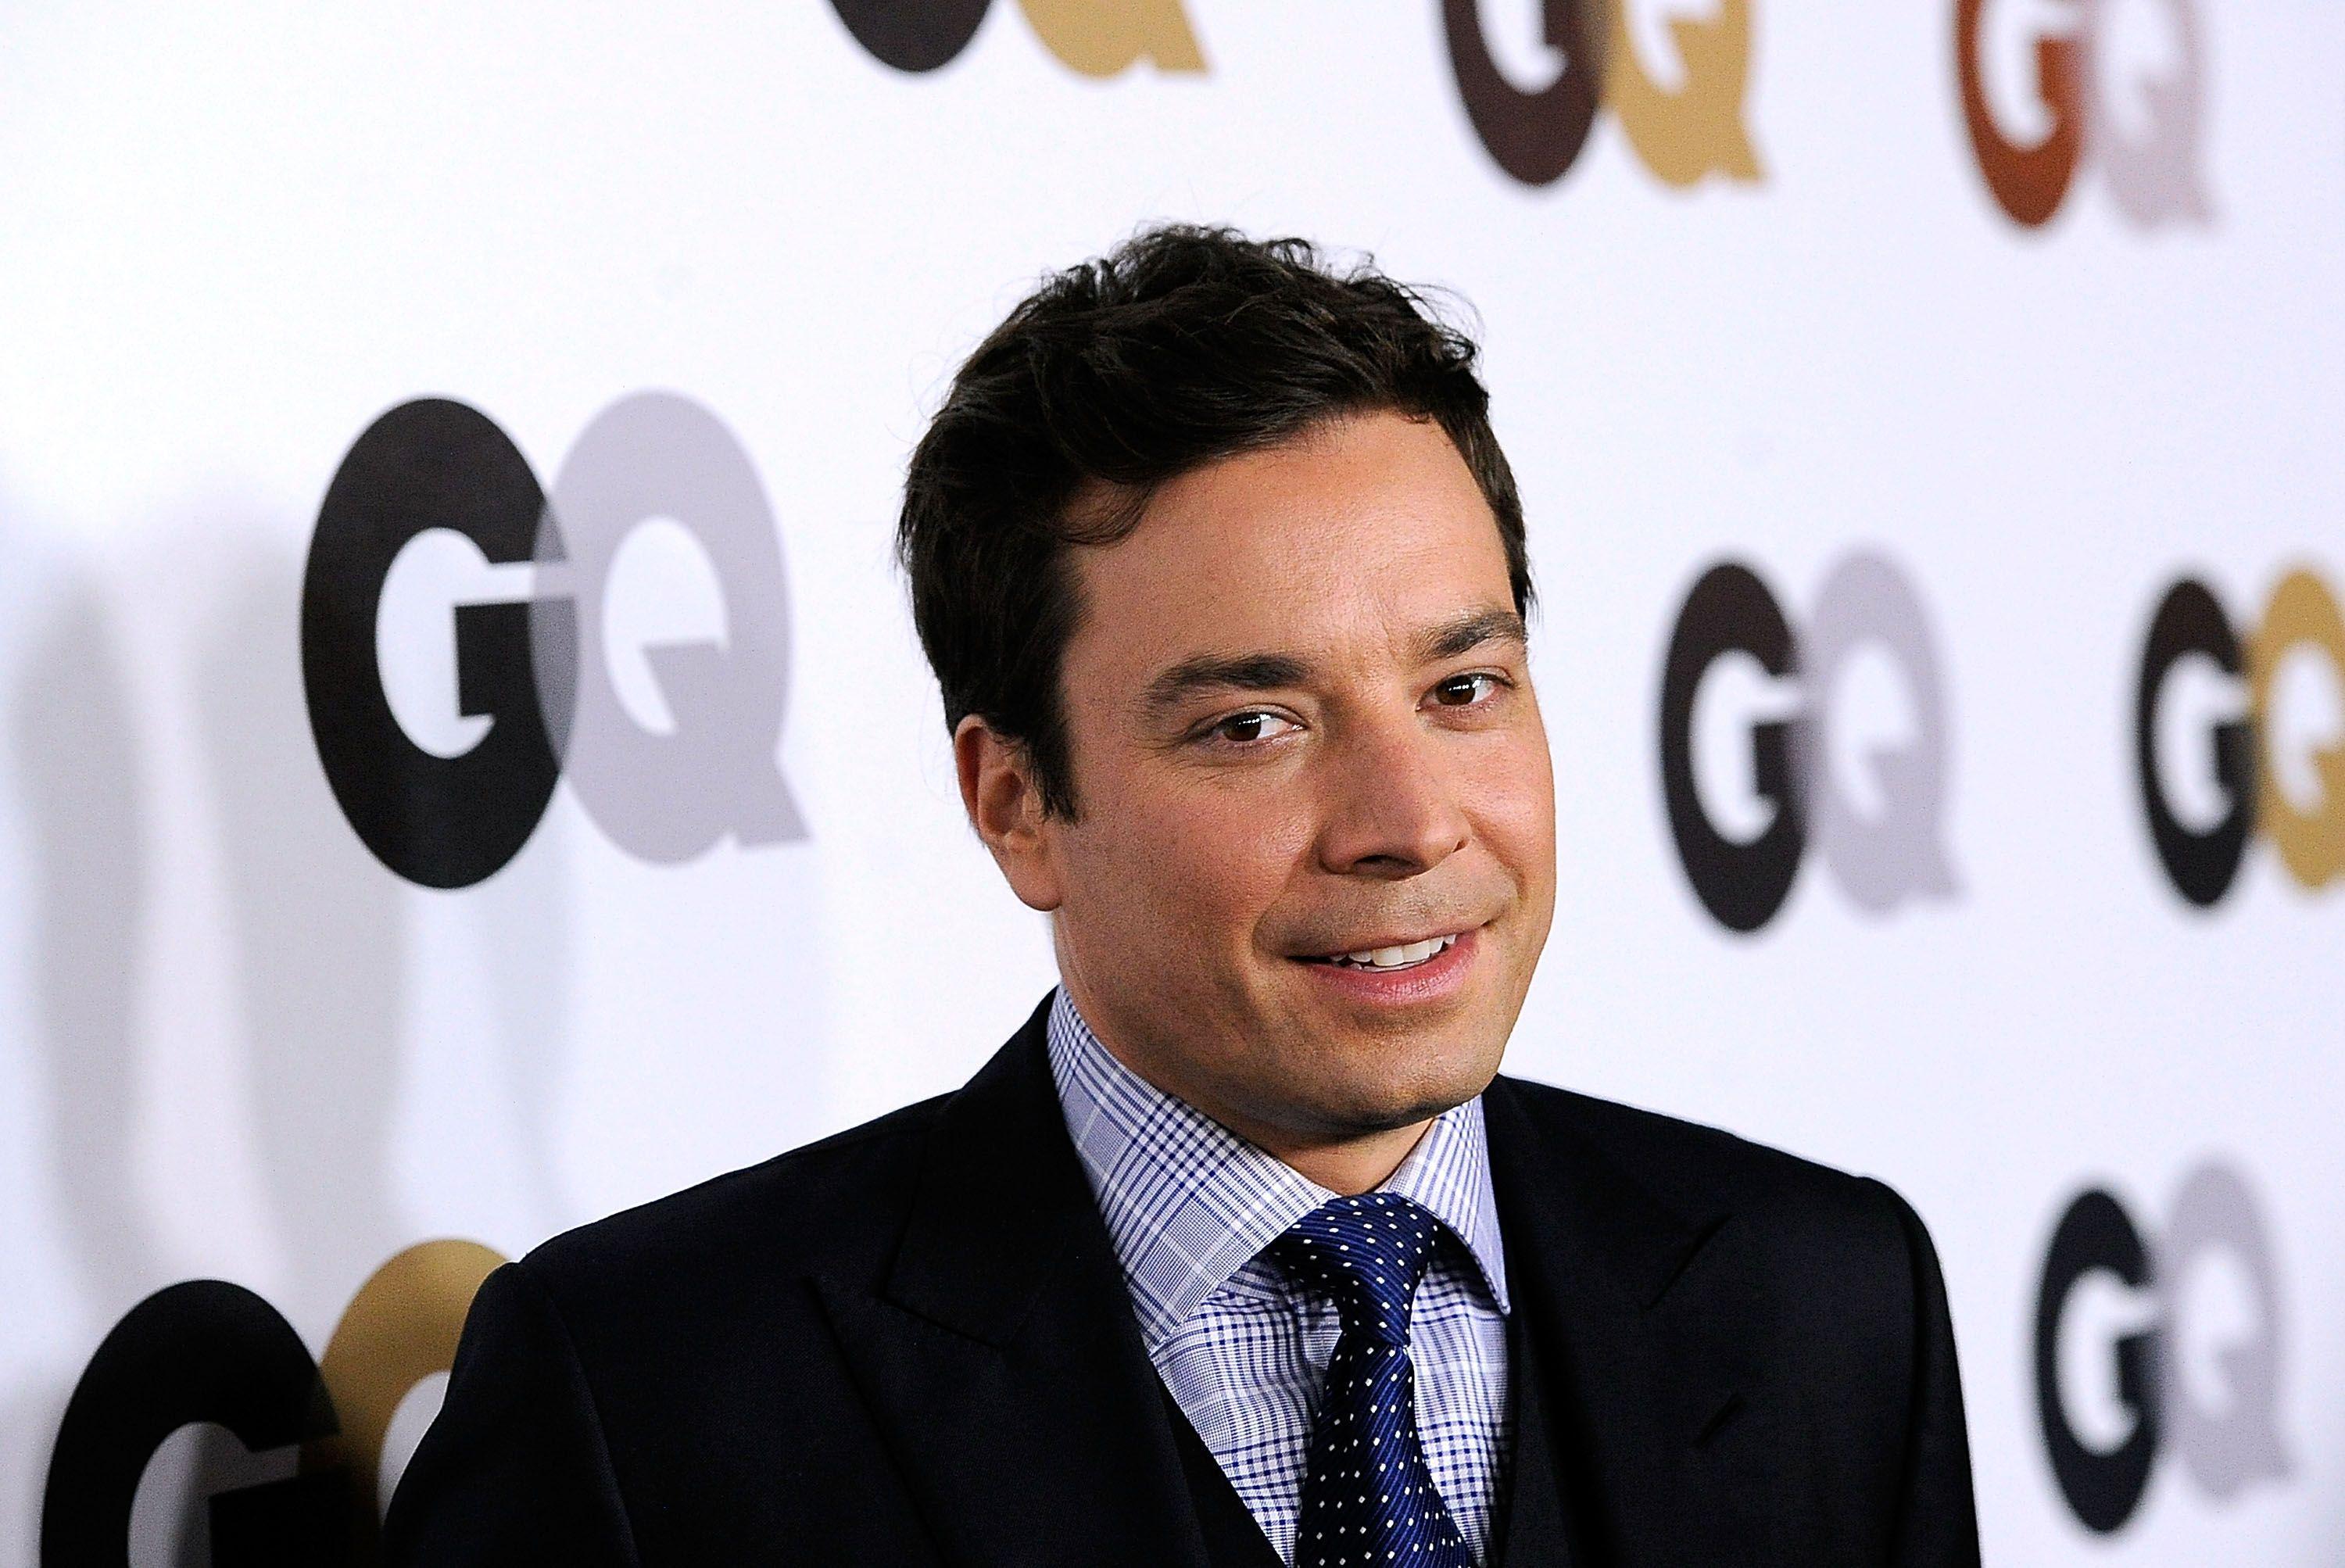 Jimmy Fallon Writes His First Children's Book Inspired By His